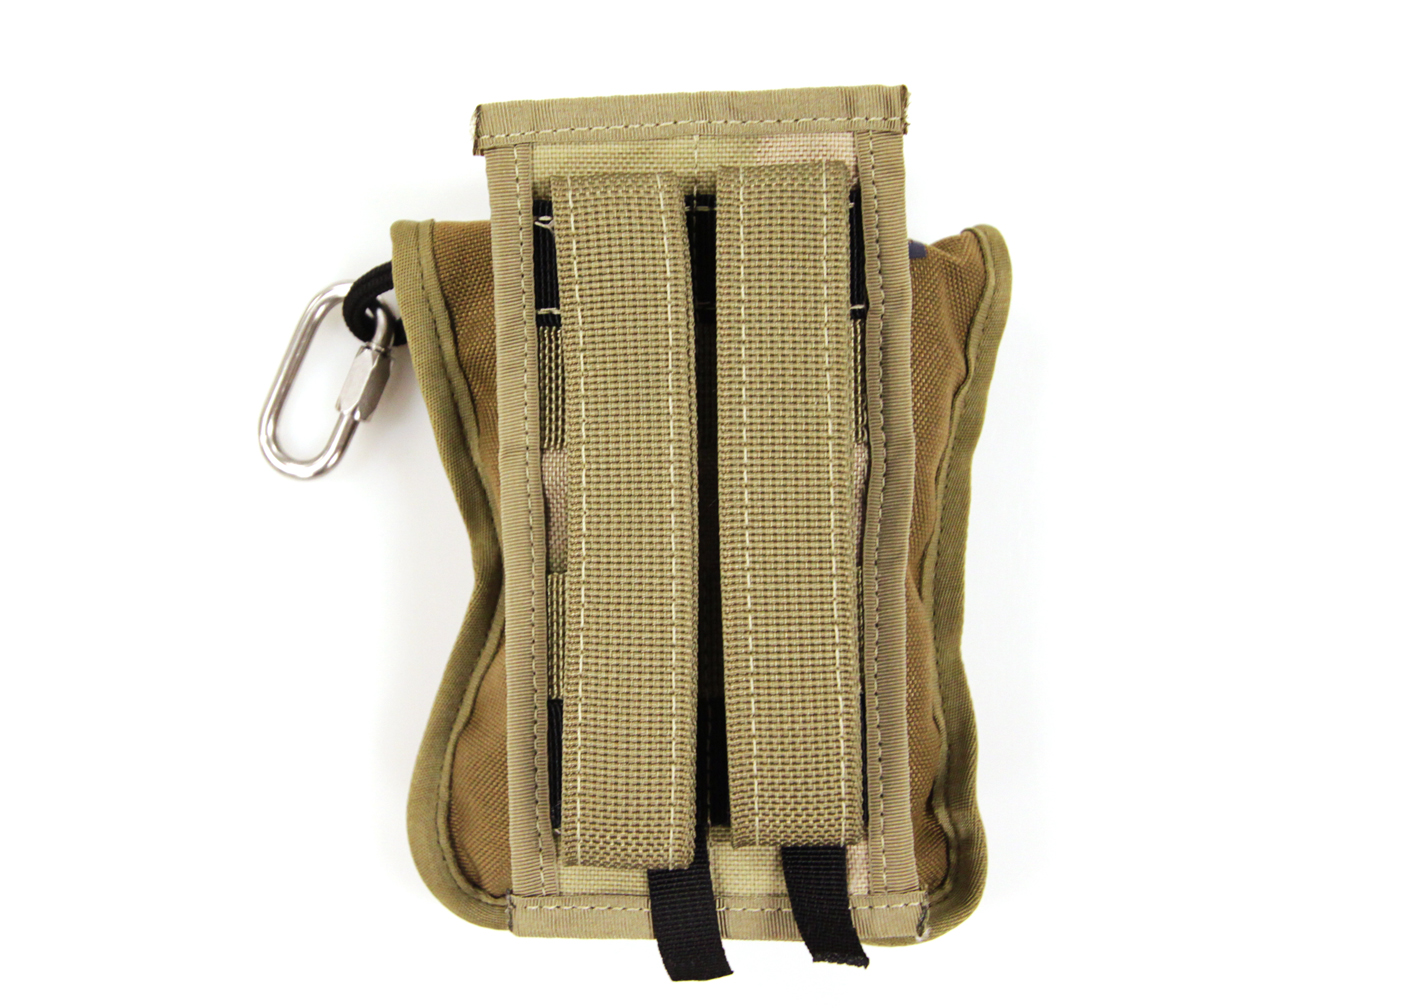 MOUT LIFELINE with Molle Attachment - Skedco